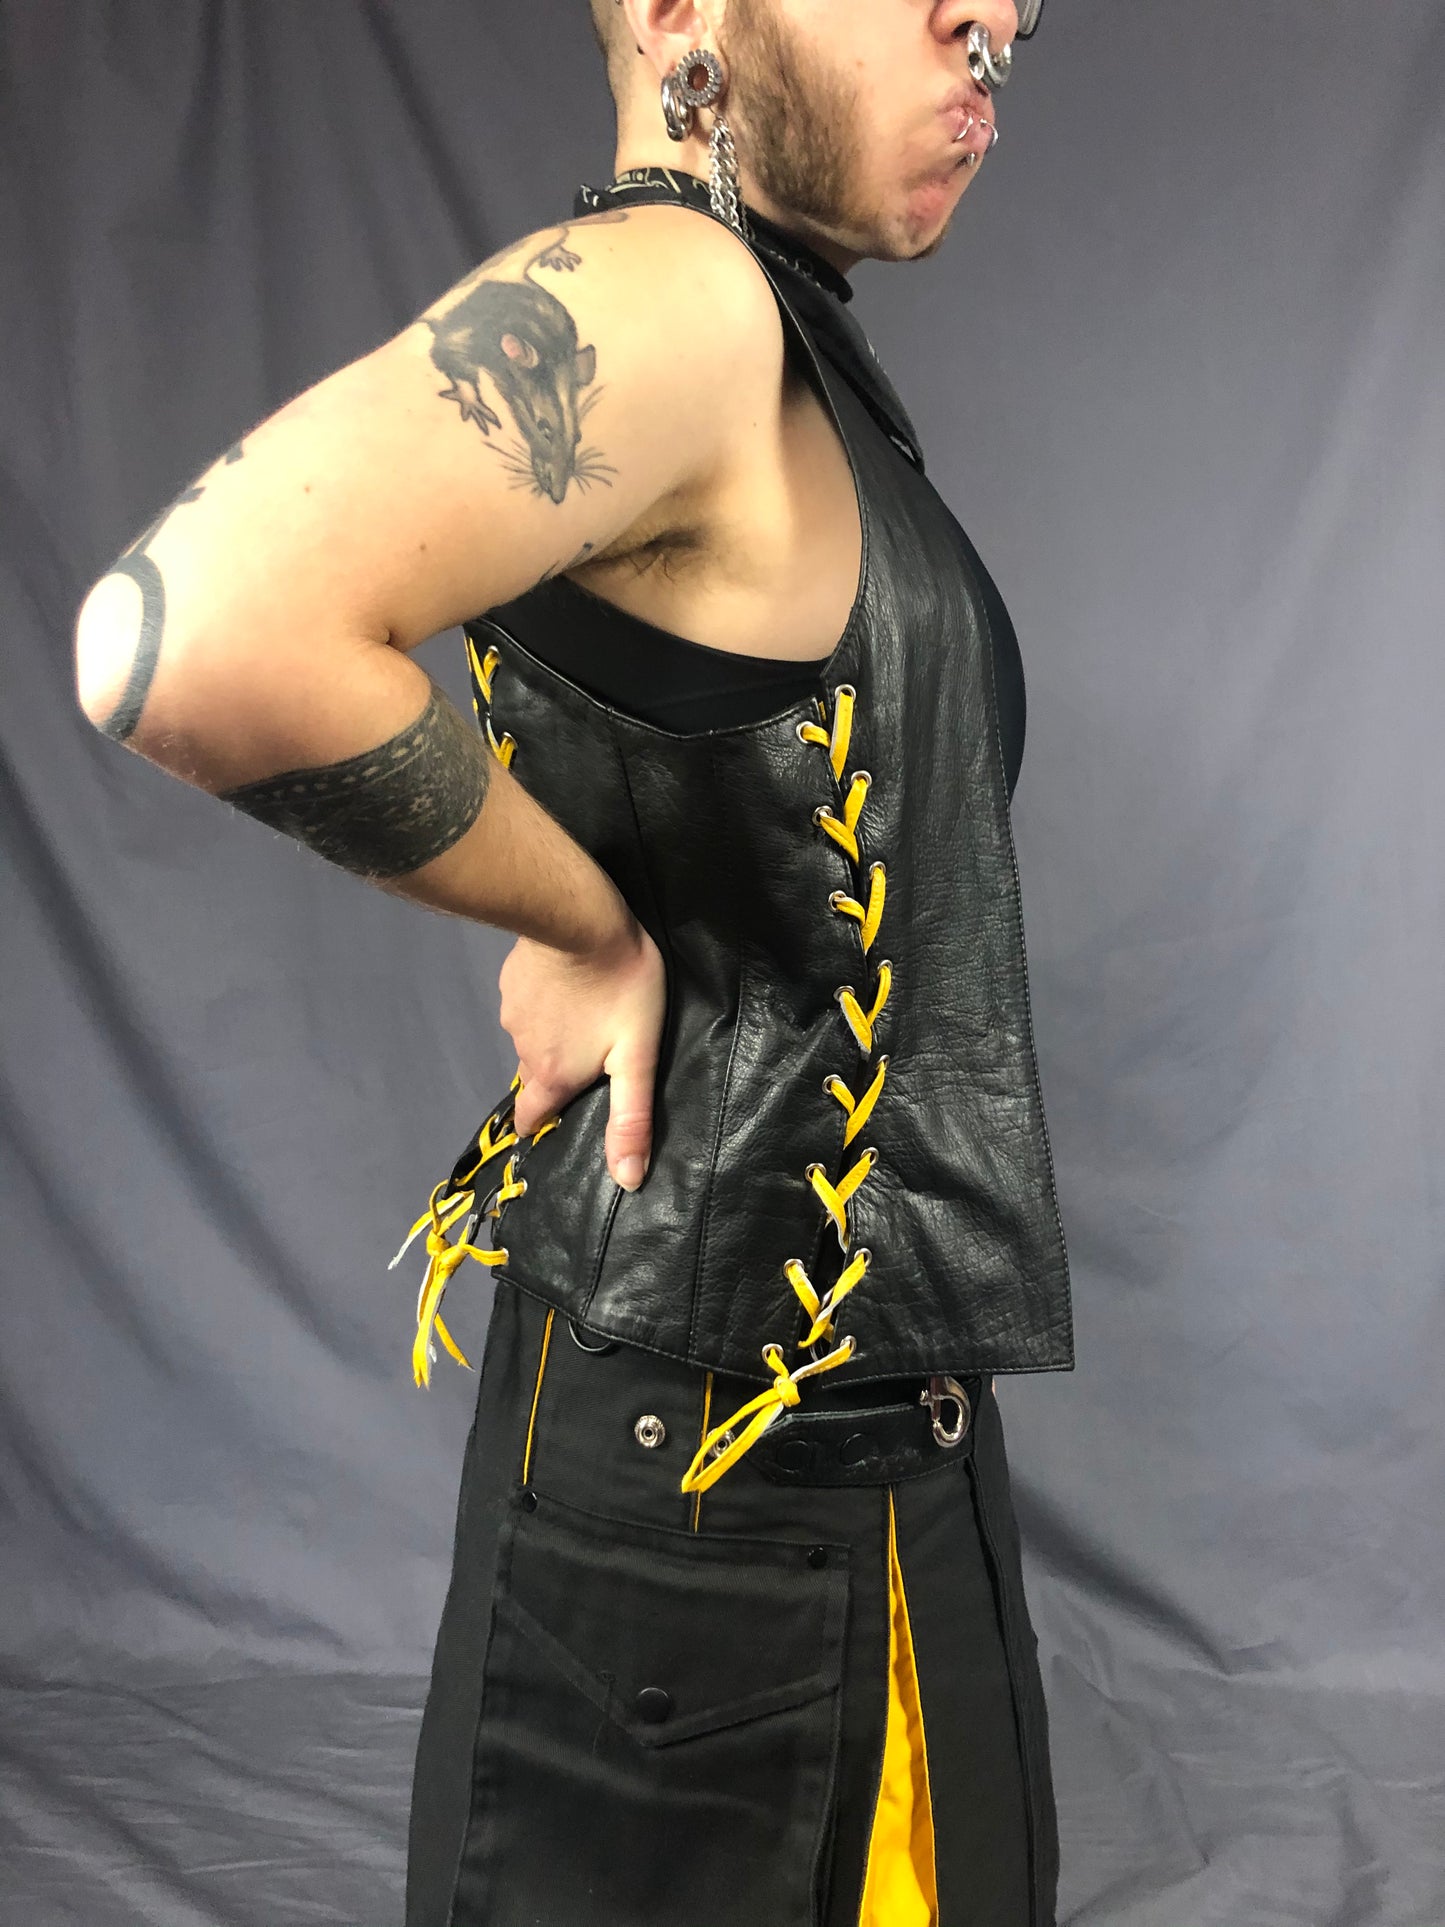 Right view of front & back lace cowhide bar vest with yellow laces, matched with a black kilt with yellow panels.